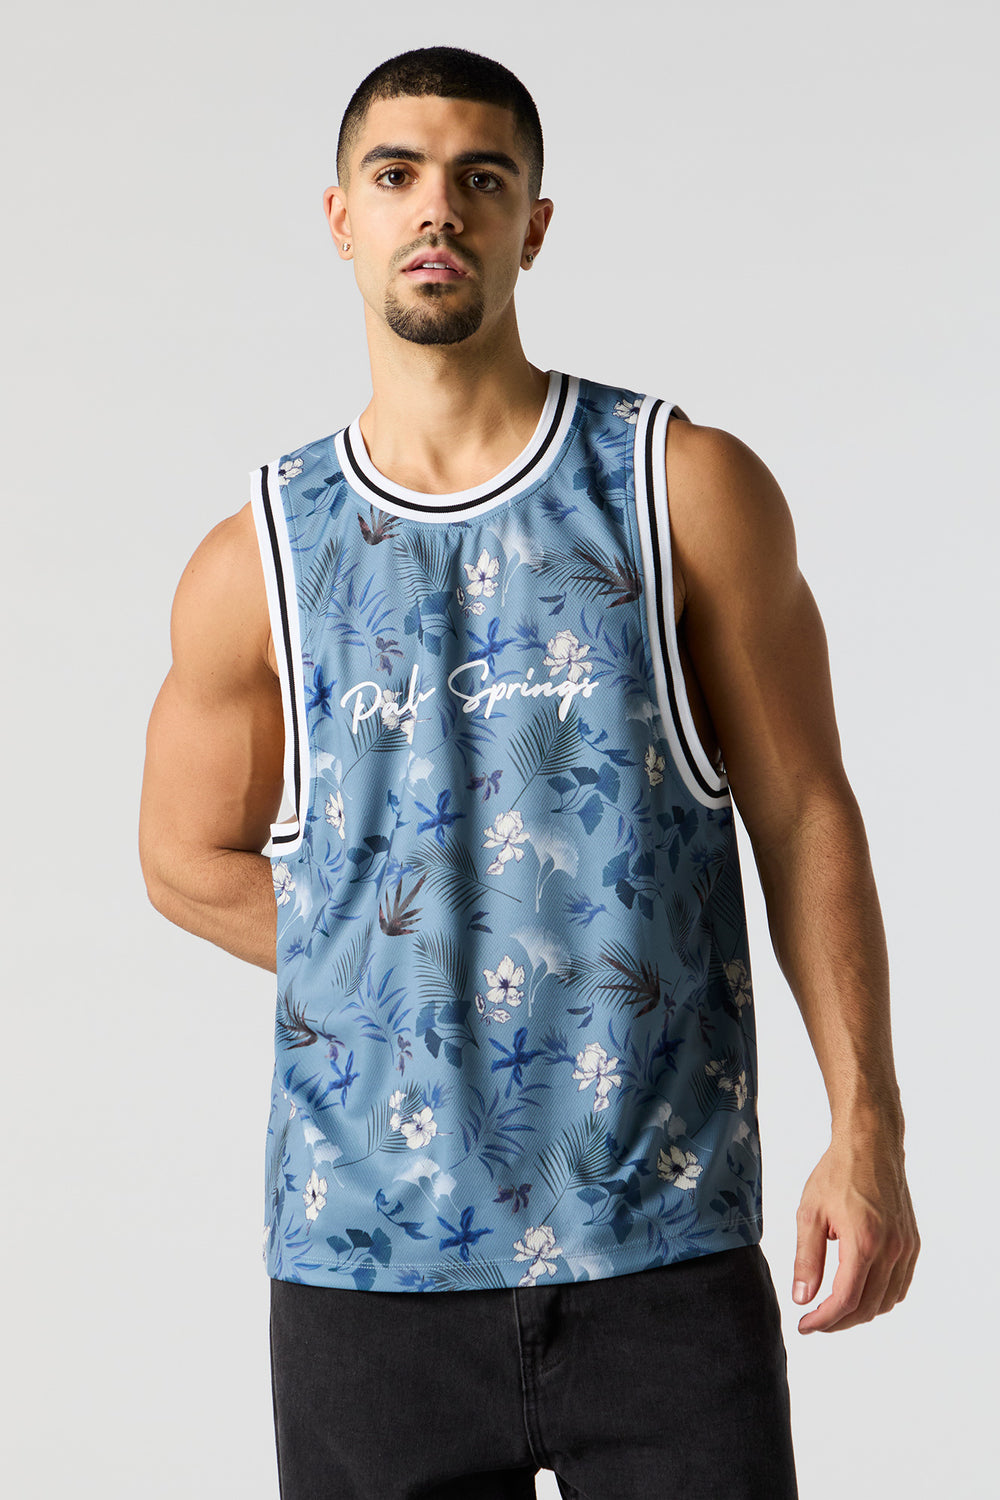 Floral Print Palm Springs Graphic Basketball Jersey Floral Print Palm Springs Graphic Basketball Jersey 1